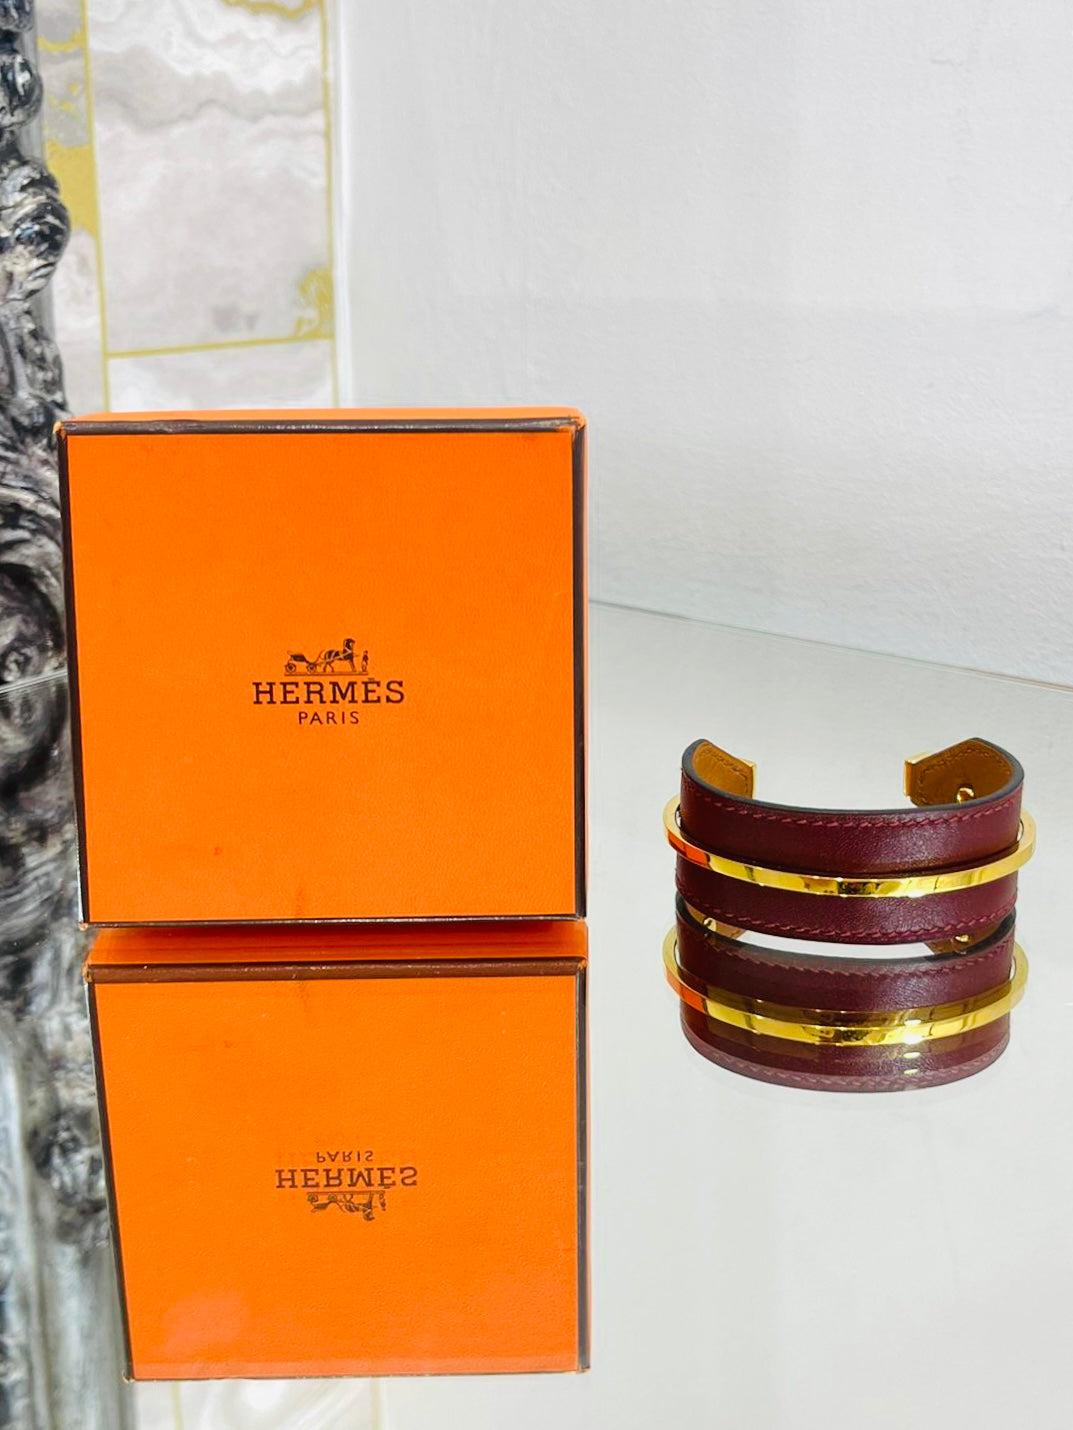 Hermes Open Cuff In Leather & Gold Plate

Burgundy leather with gold hardware. Date stamp

O in a square.

Size - One Size

Condition - Very Good (Light signs of wear)

Composition - Leather, Gold Plated Metal

Comes With - Box, Dust Bag